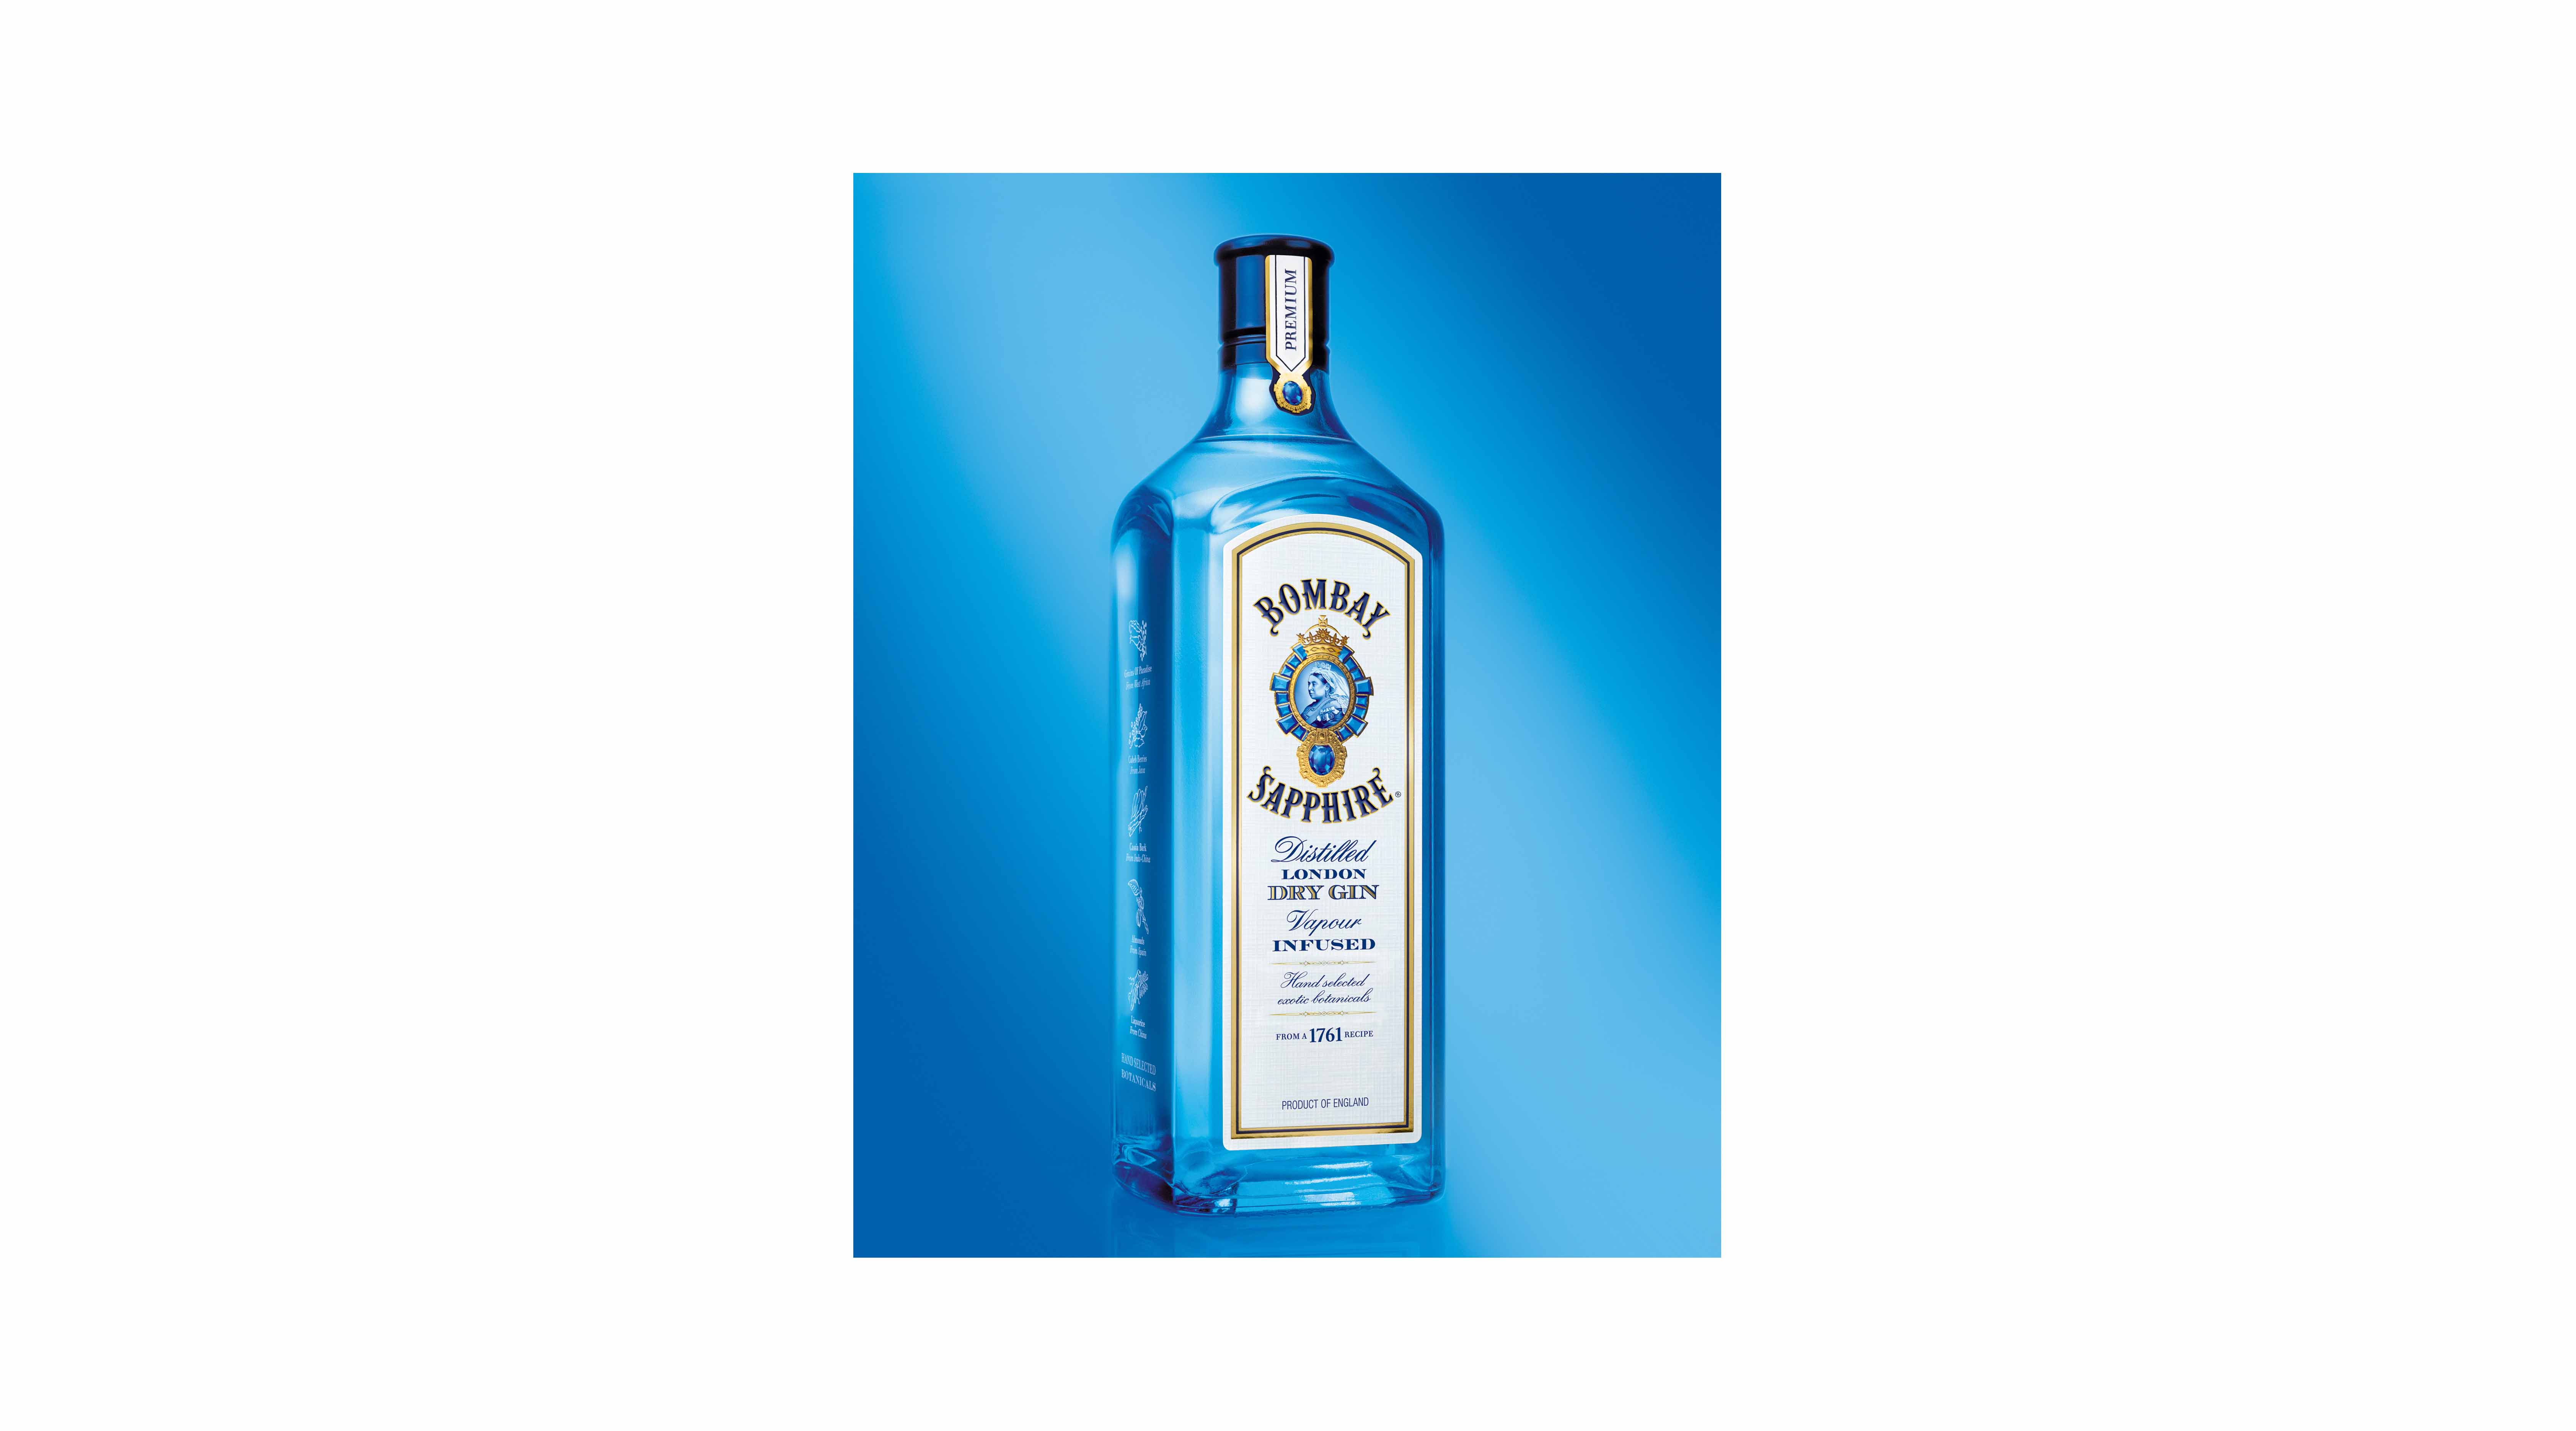 Bombay Sapphire has been awarded the Gold and Double Gold medal at the 17th San Francisco World Spirits Competition.